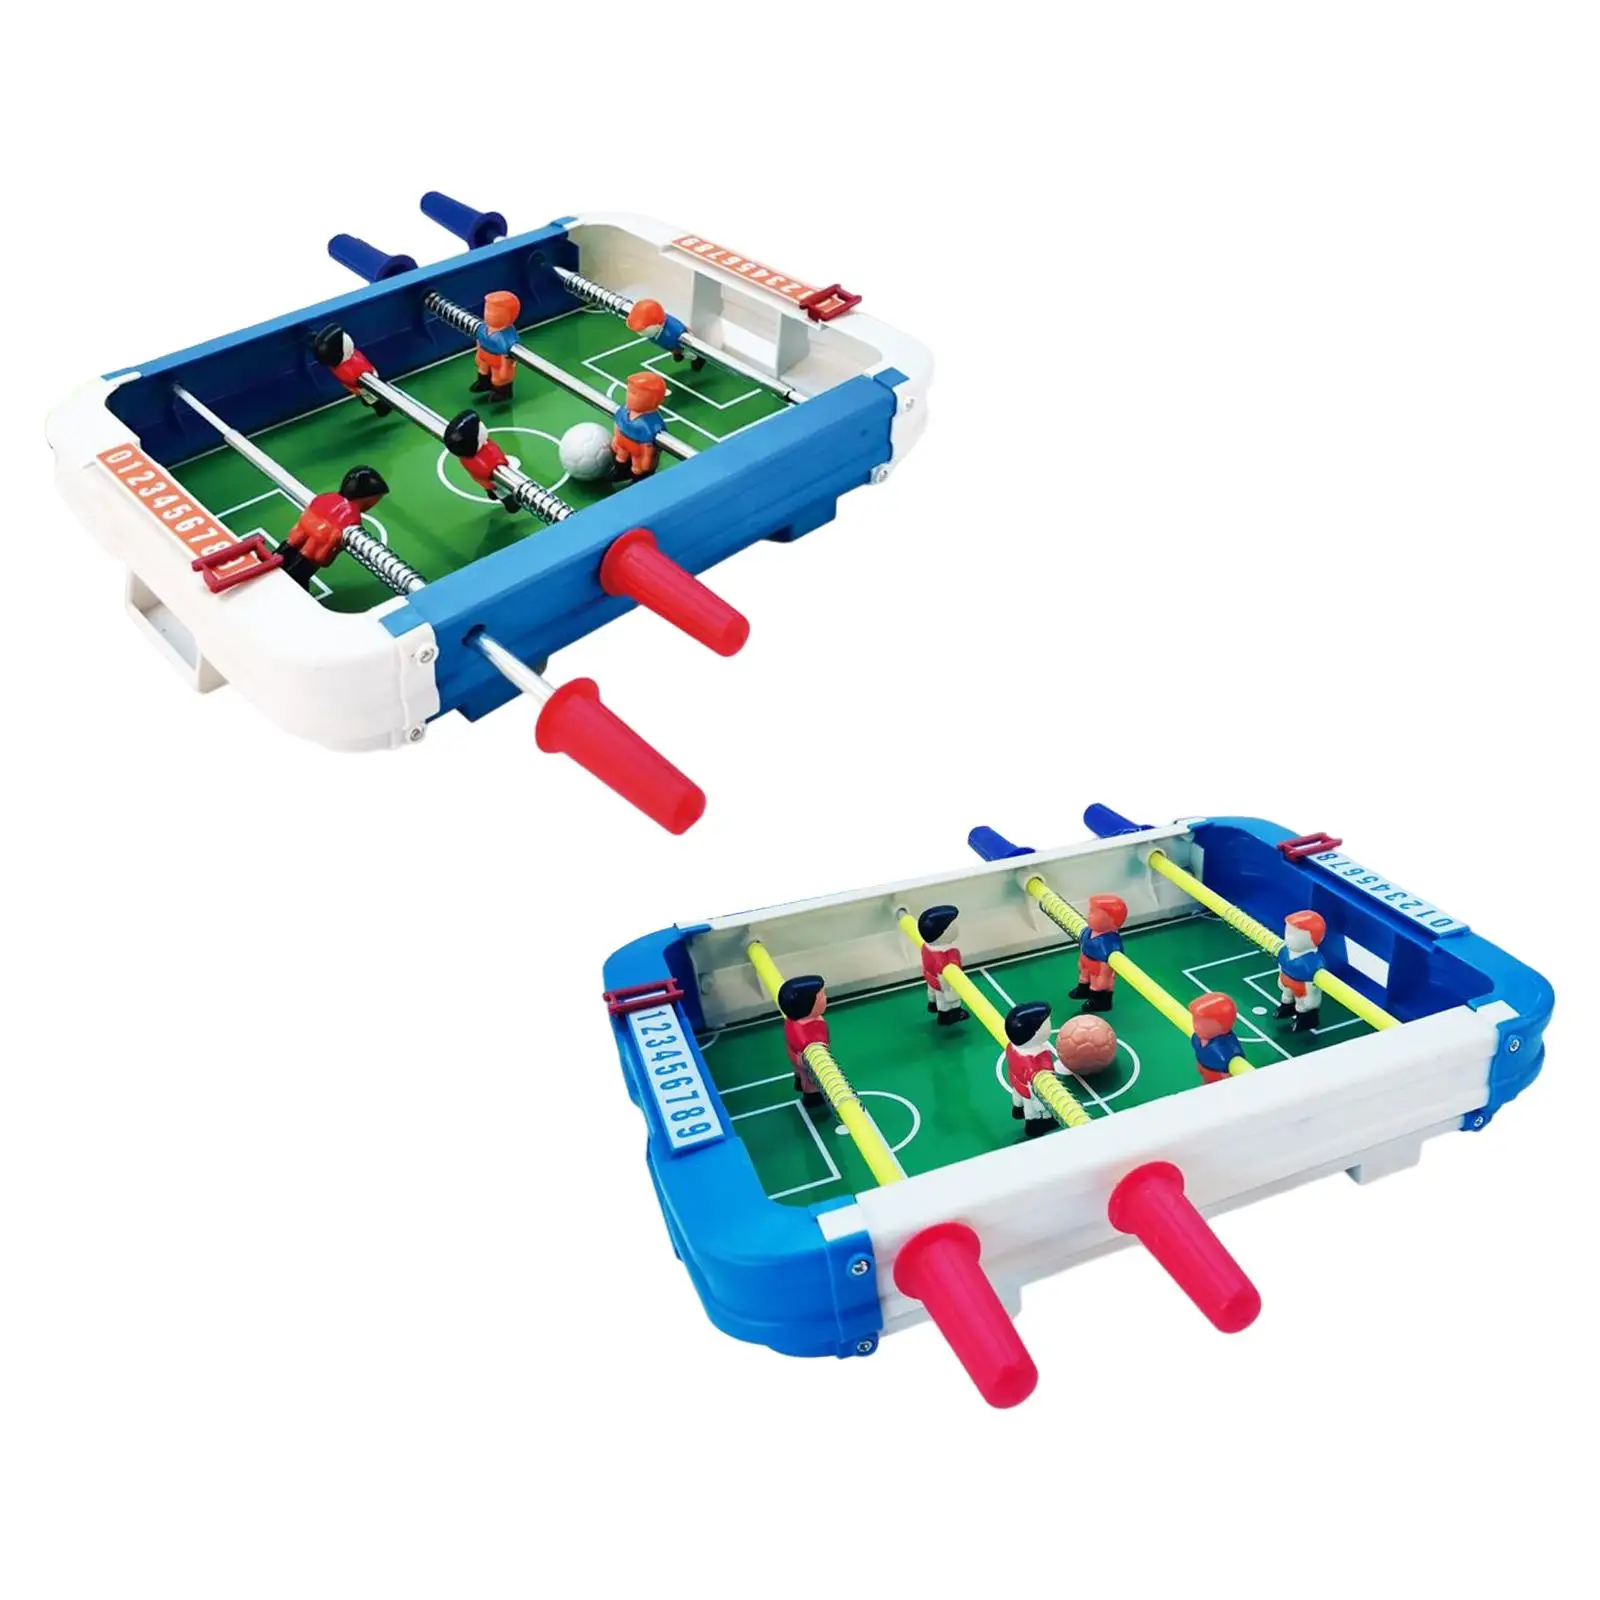 Foosball Table, Tabletop Football Game Interactive Toy Table Top Soccer Game for Parent Child Interaction Adults Kids